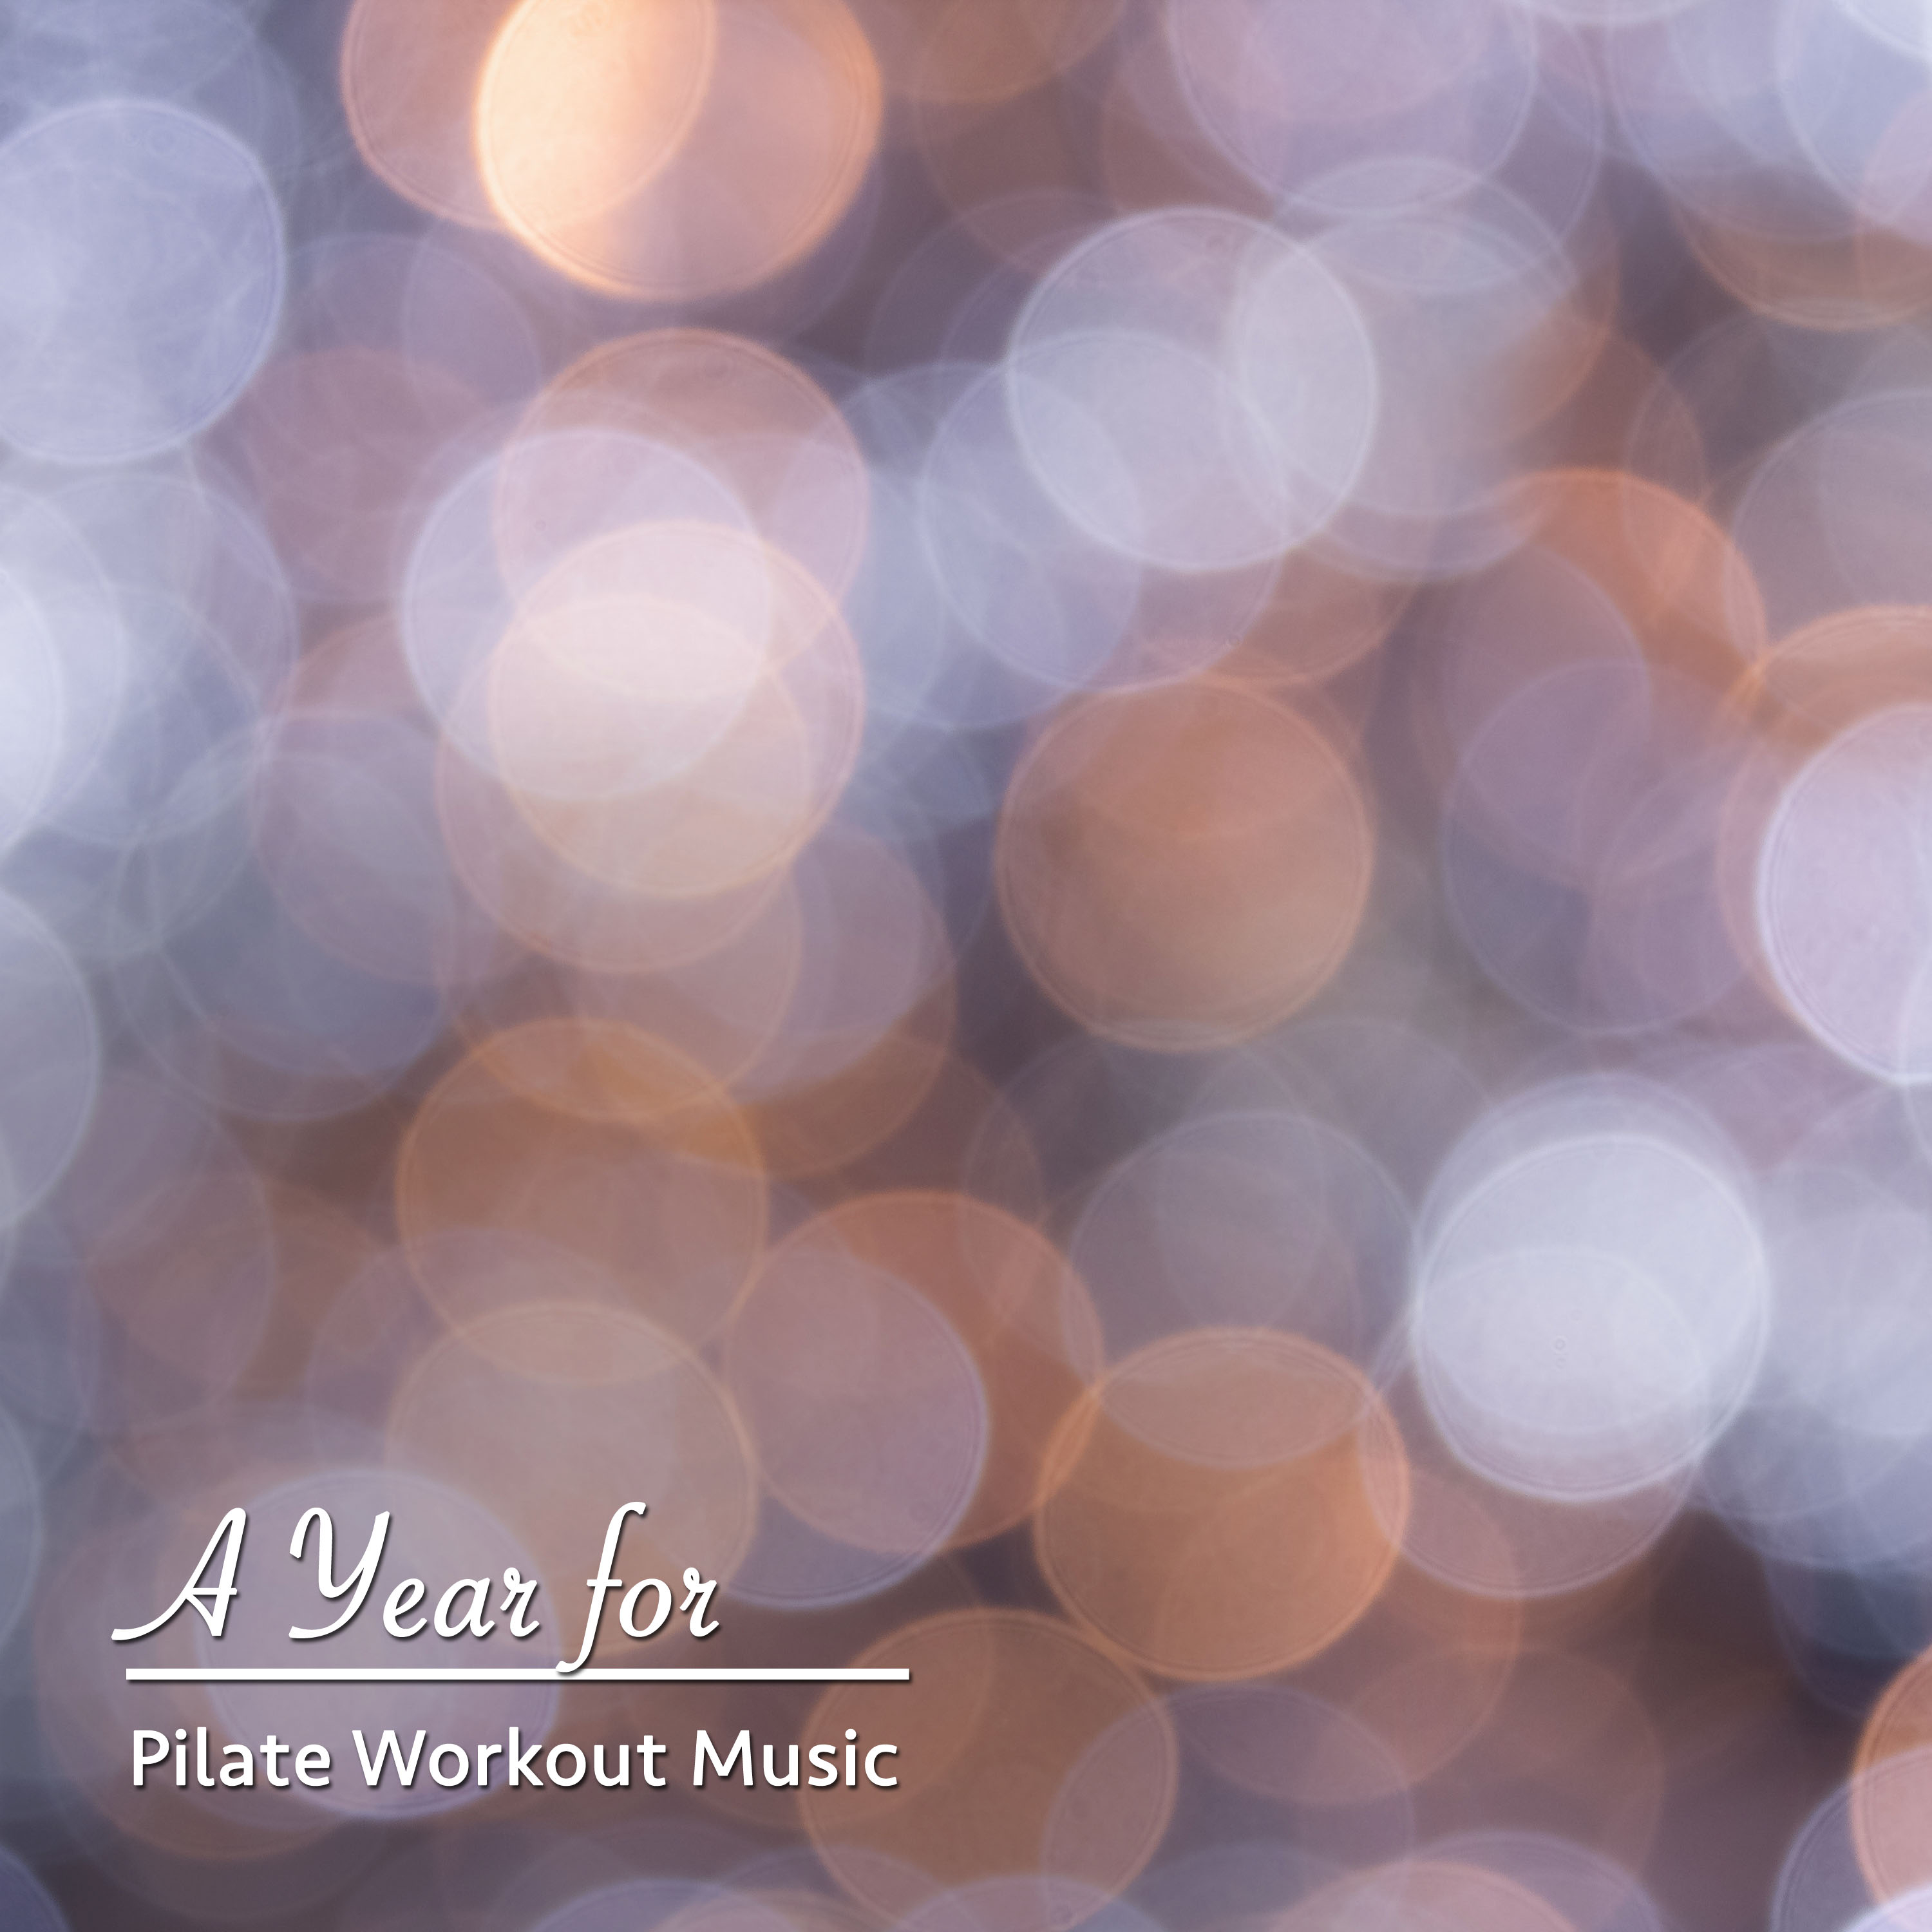 2018 A Year for Pilate Workout Music